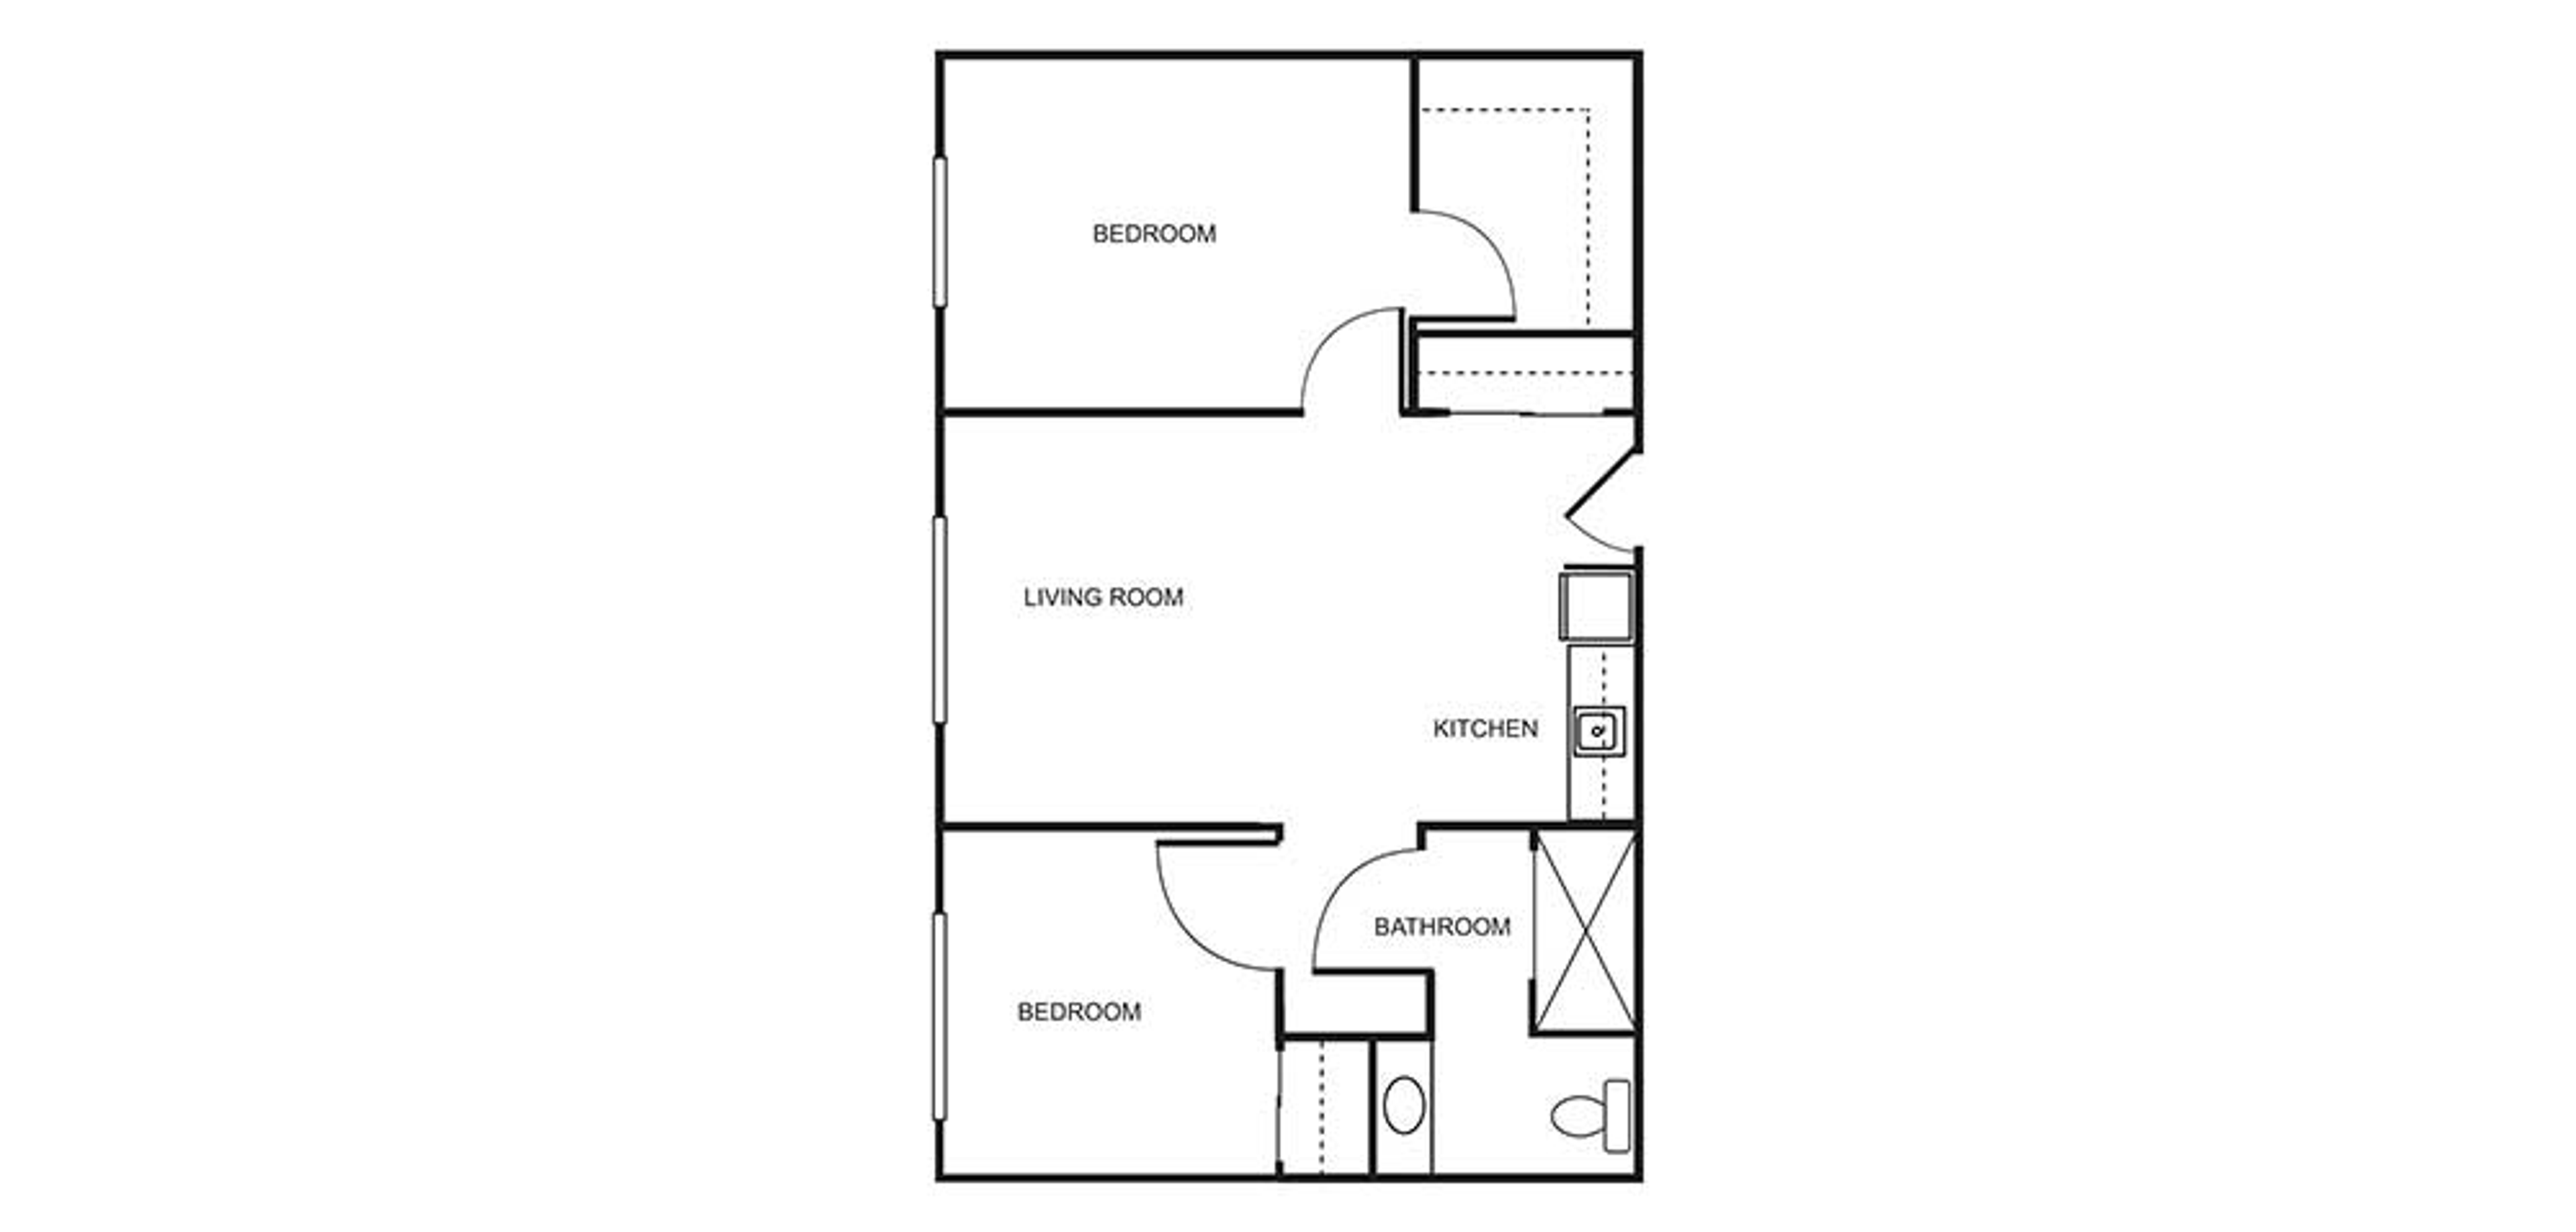 Floorplan - The Auberge at Missoula Valley - 2 bed, 1 bath Assisted Living